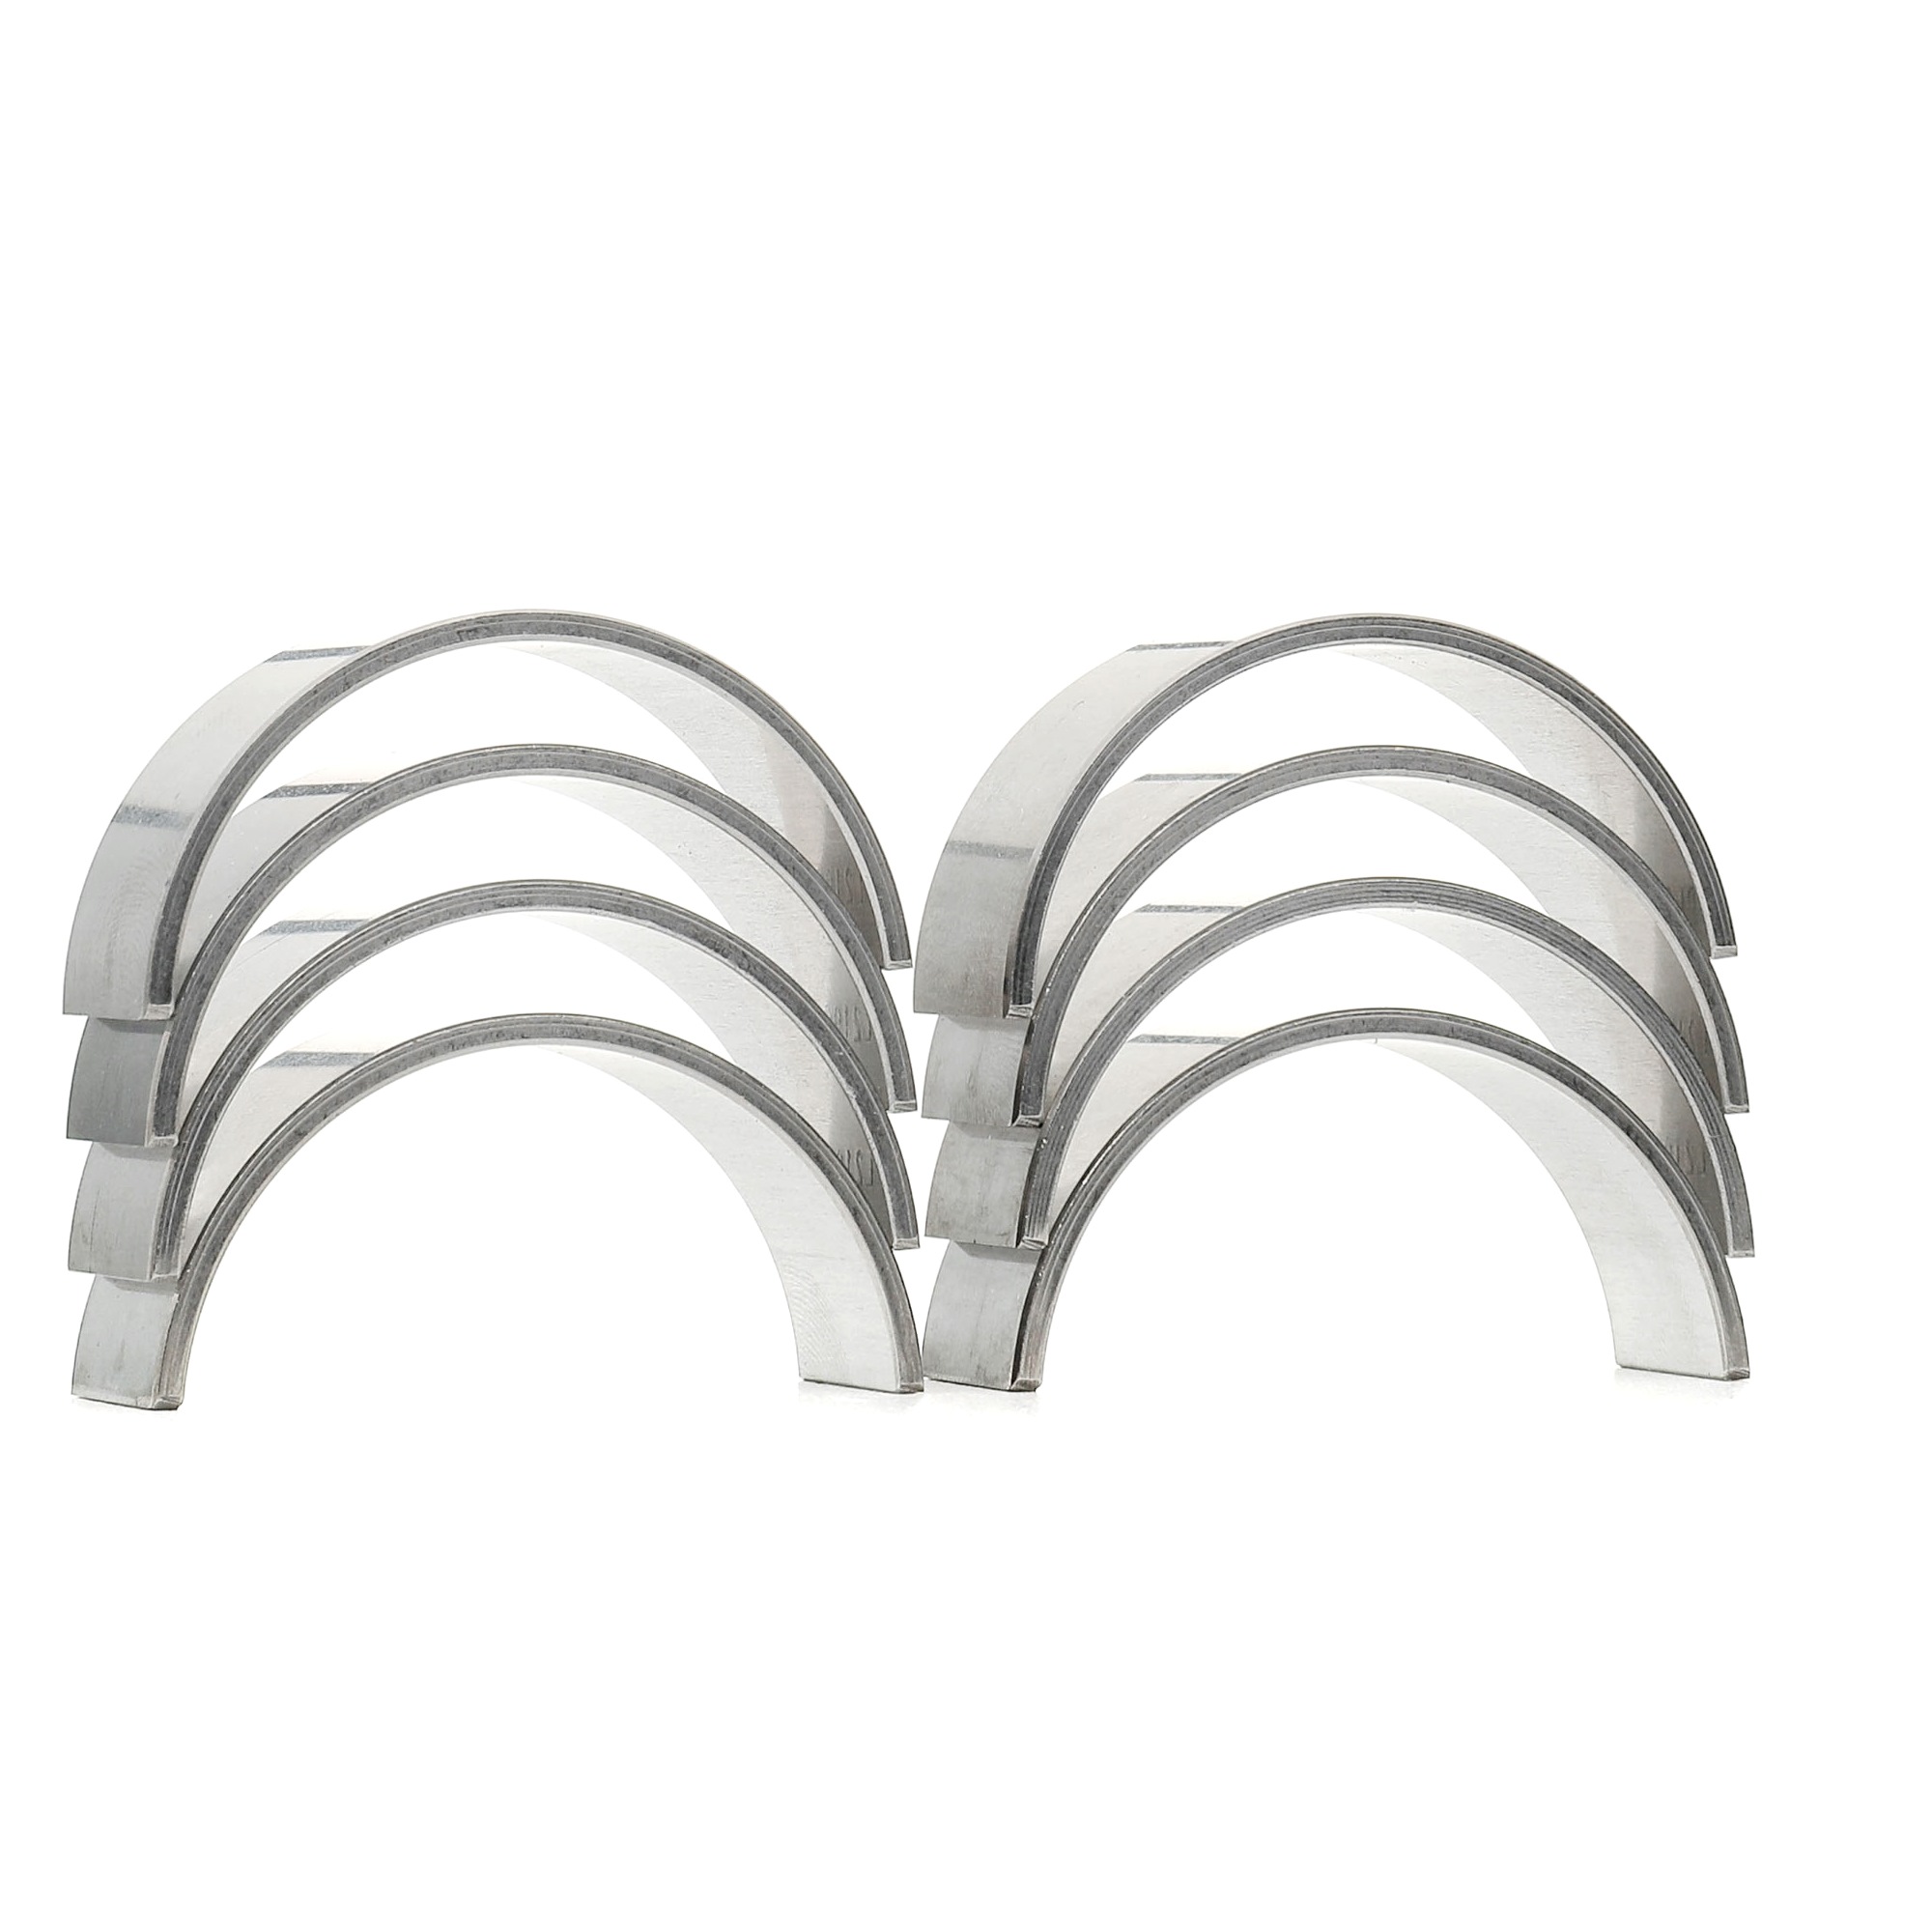 Great value for money - MAHLE ORIGINAL Conrod Bearing Set 021 PS 21928 000